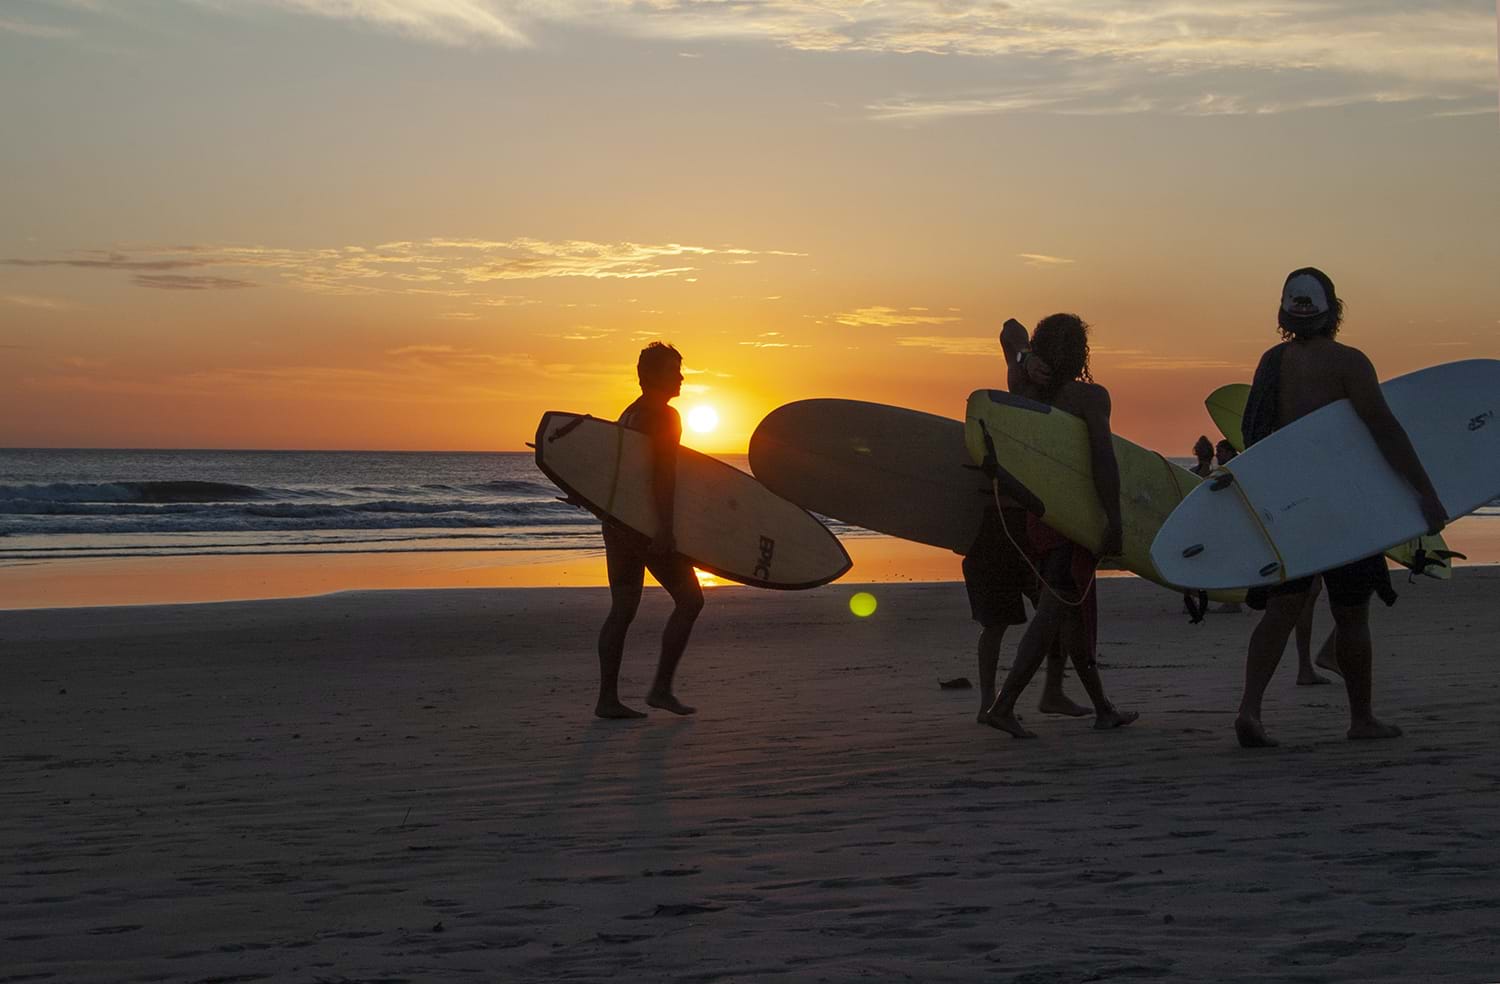 Group of people carrying surfboards on beach